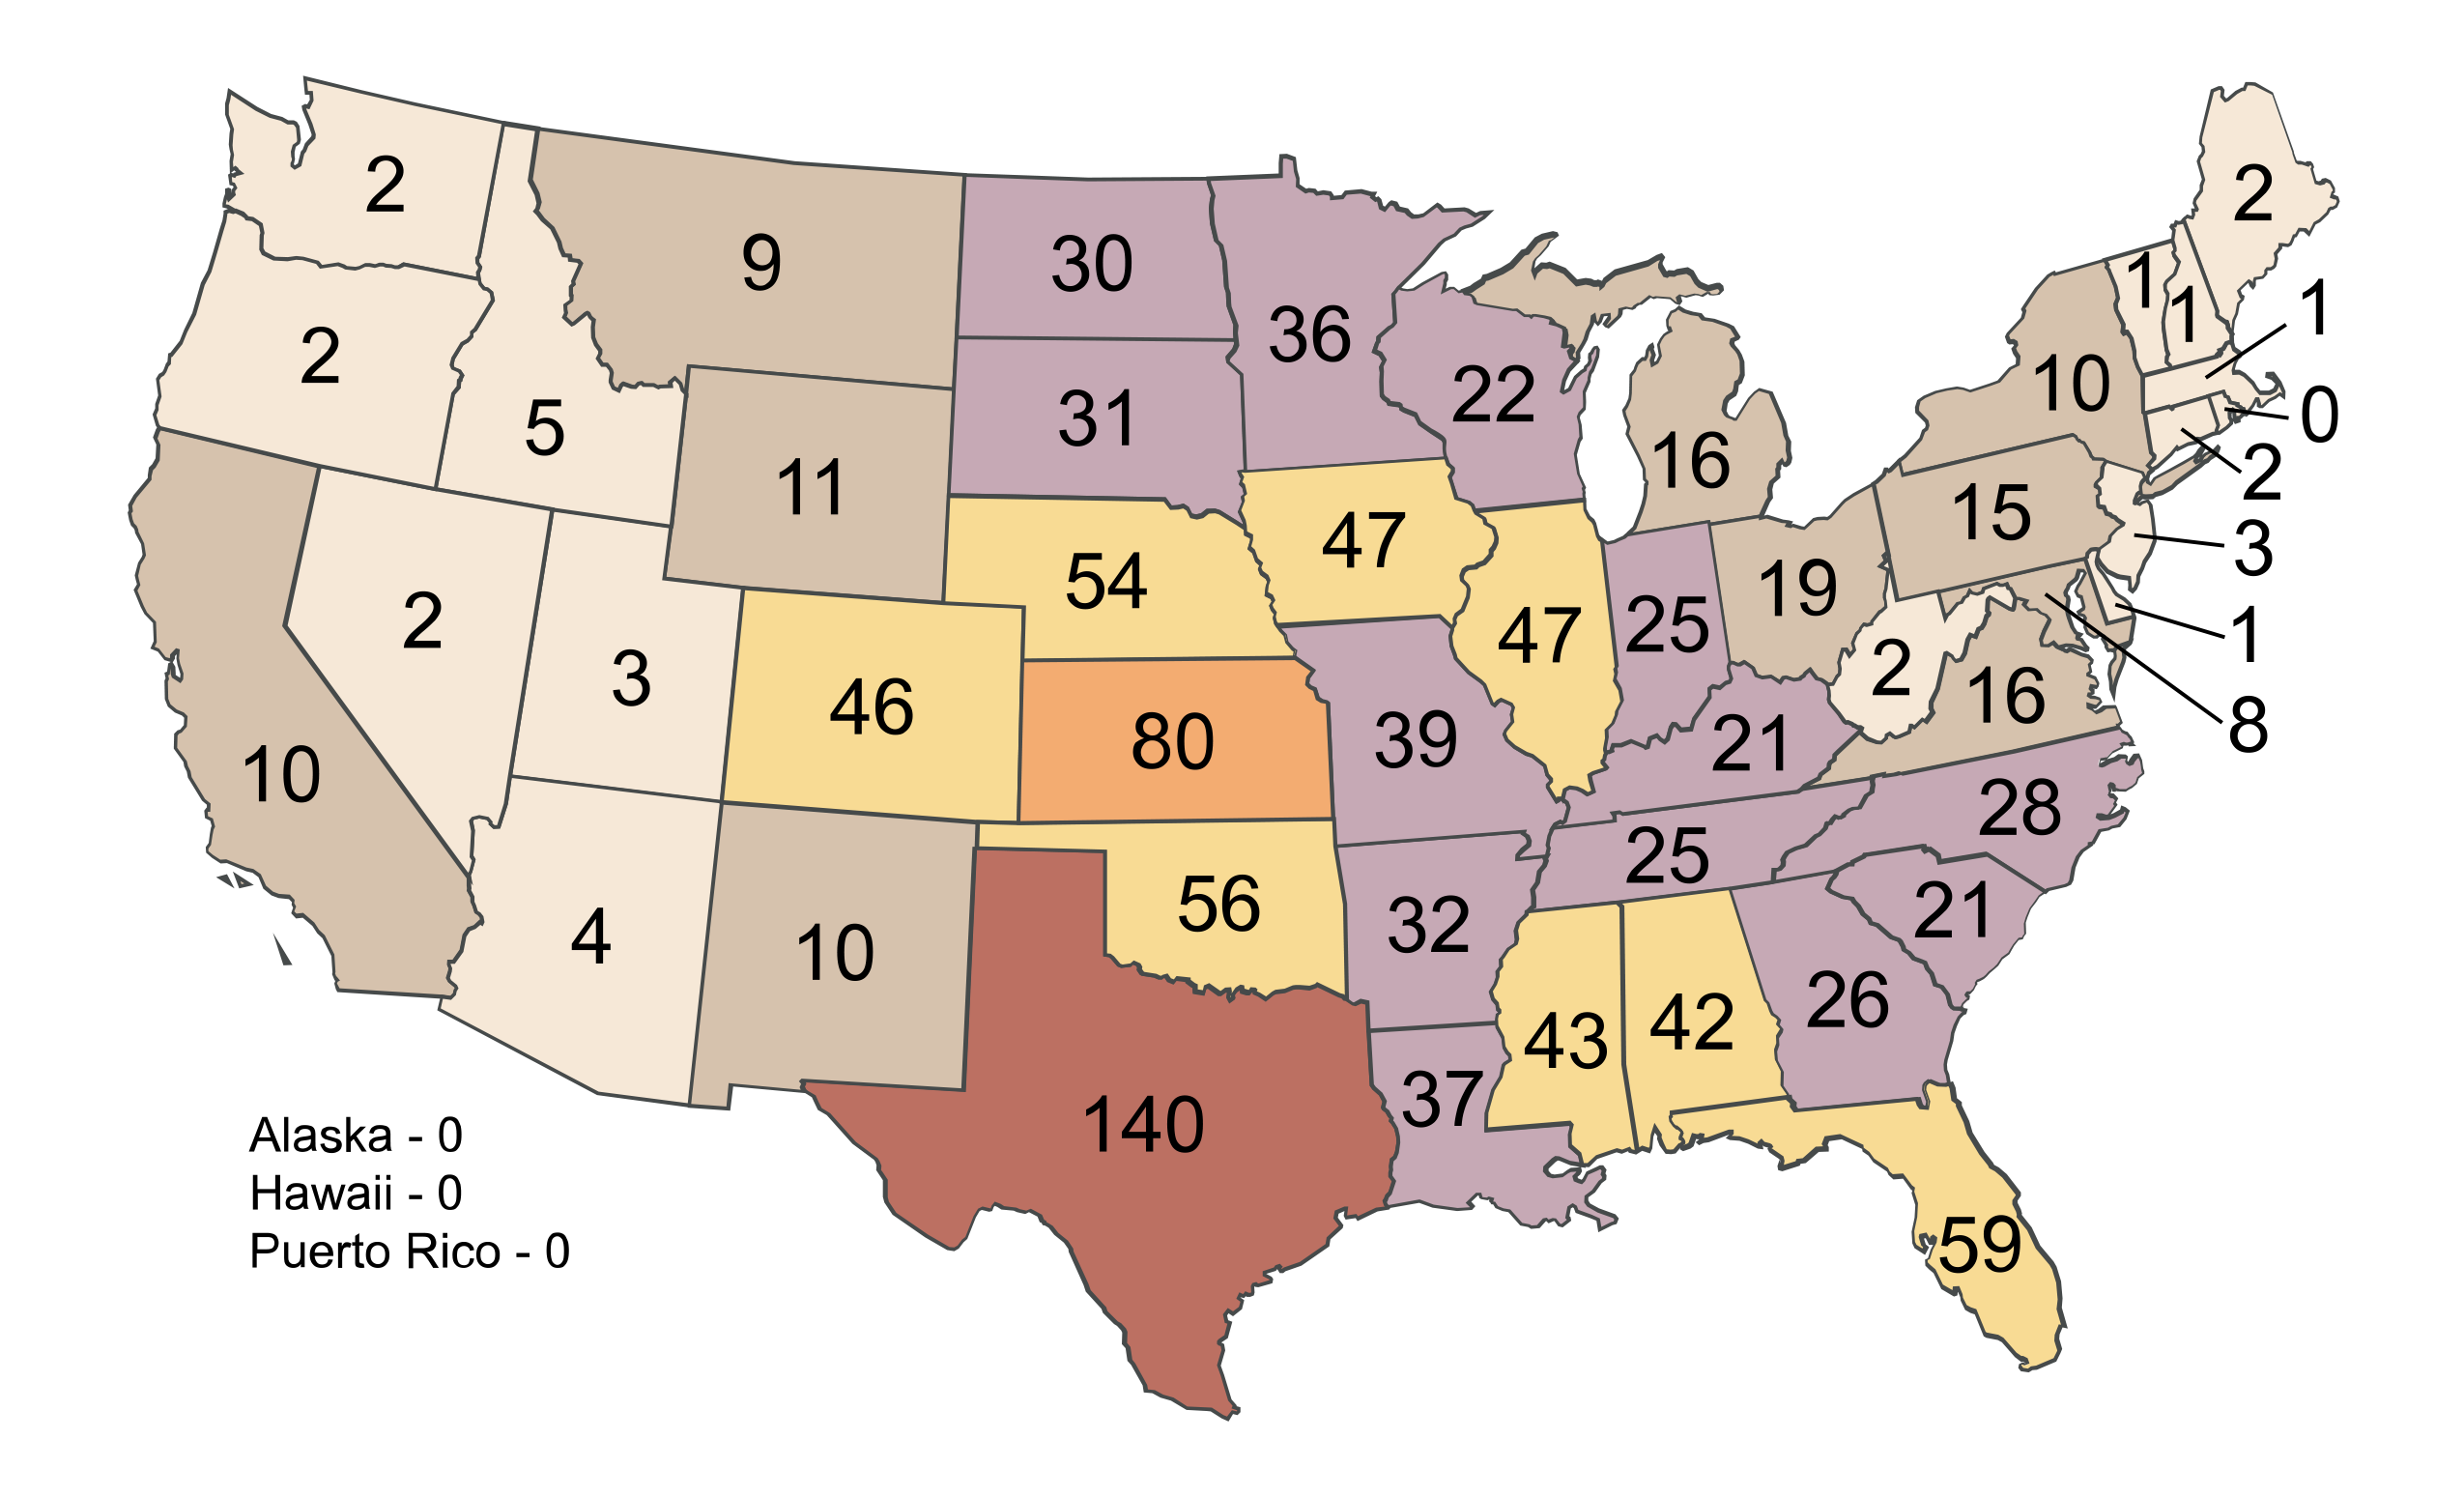 Annual average number of tornadoes by state 